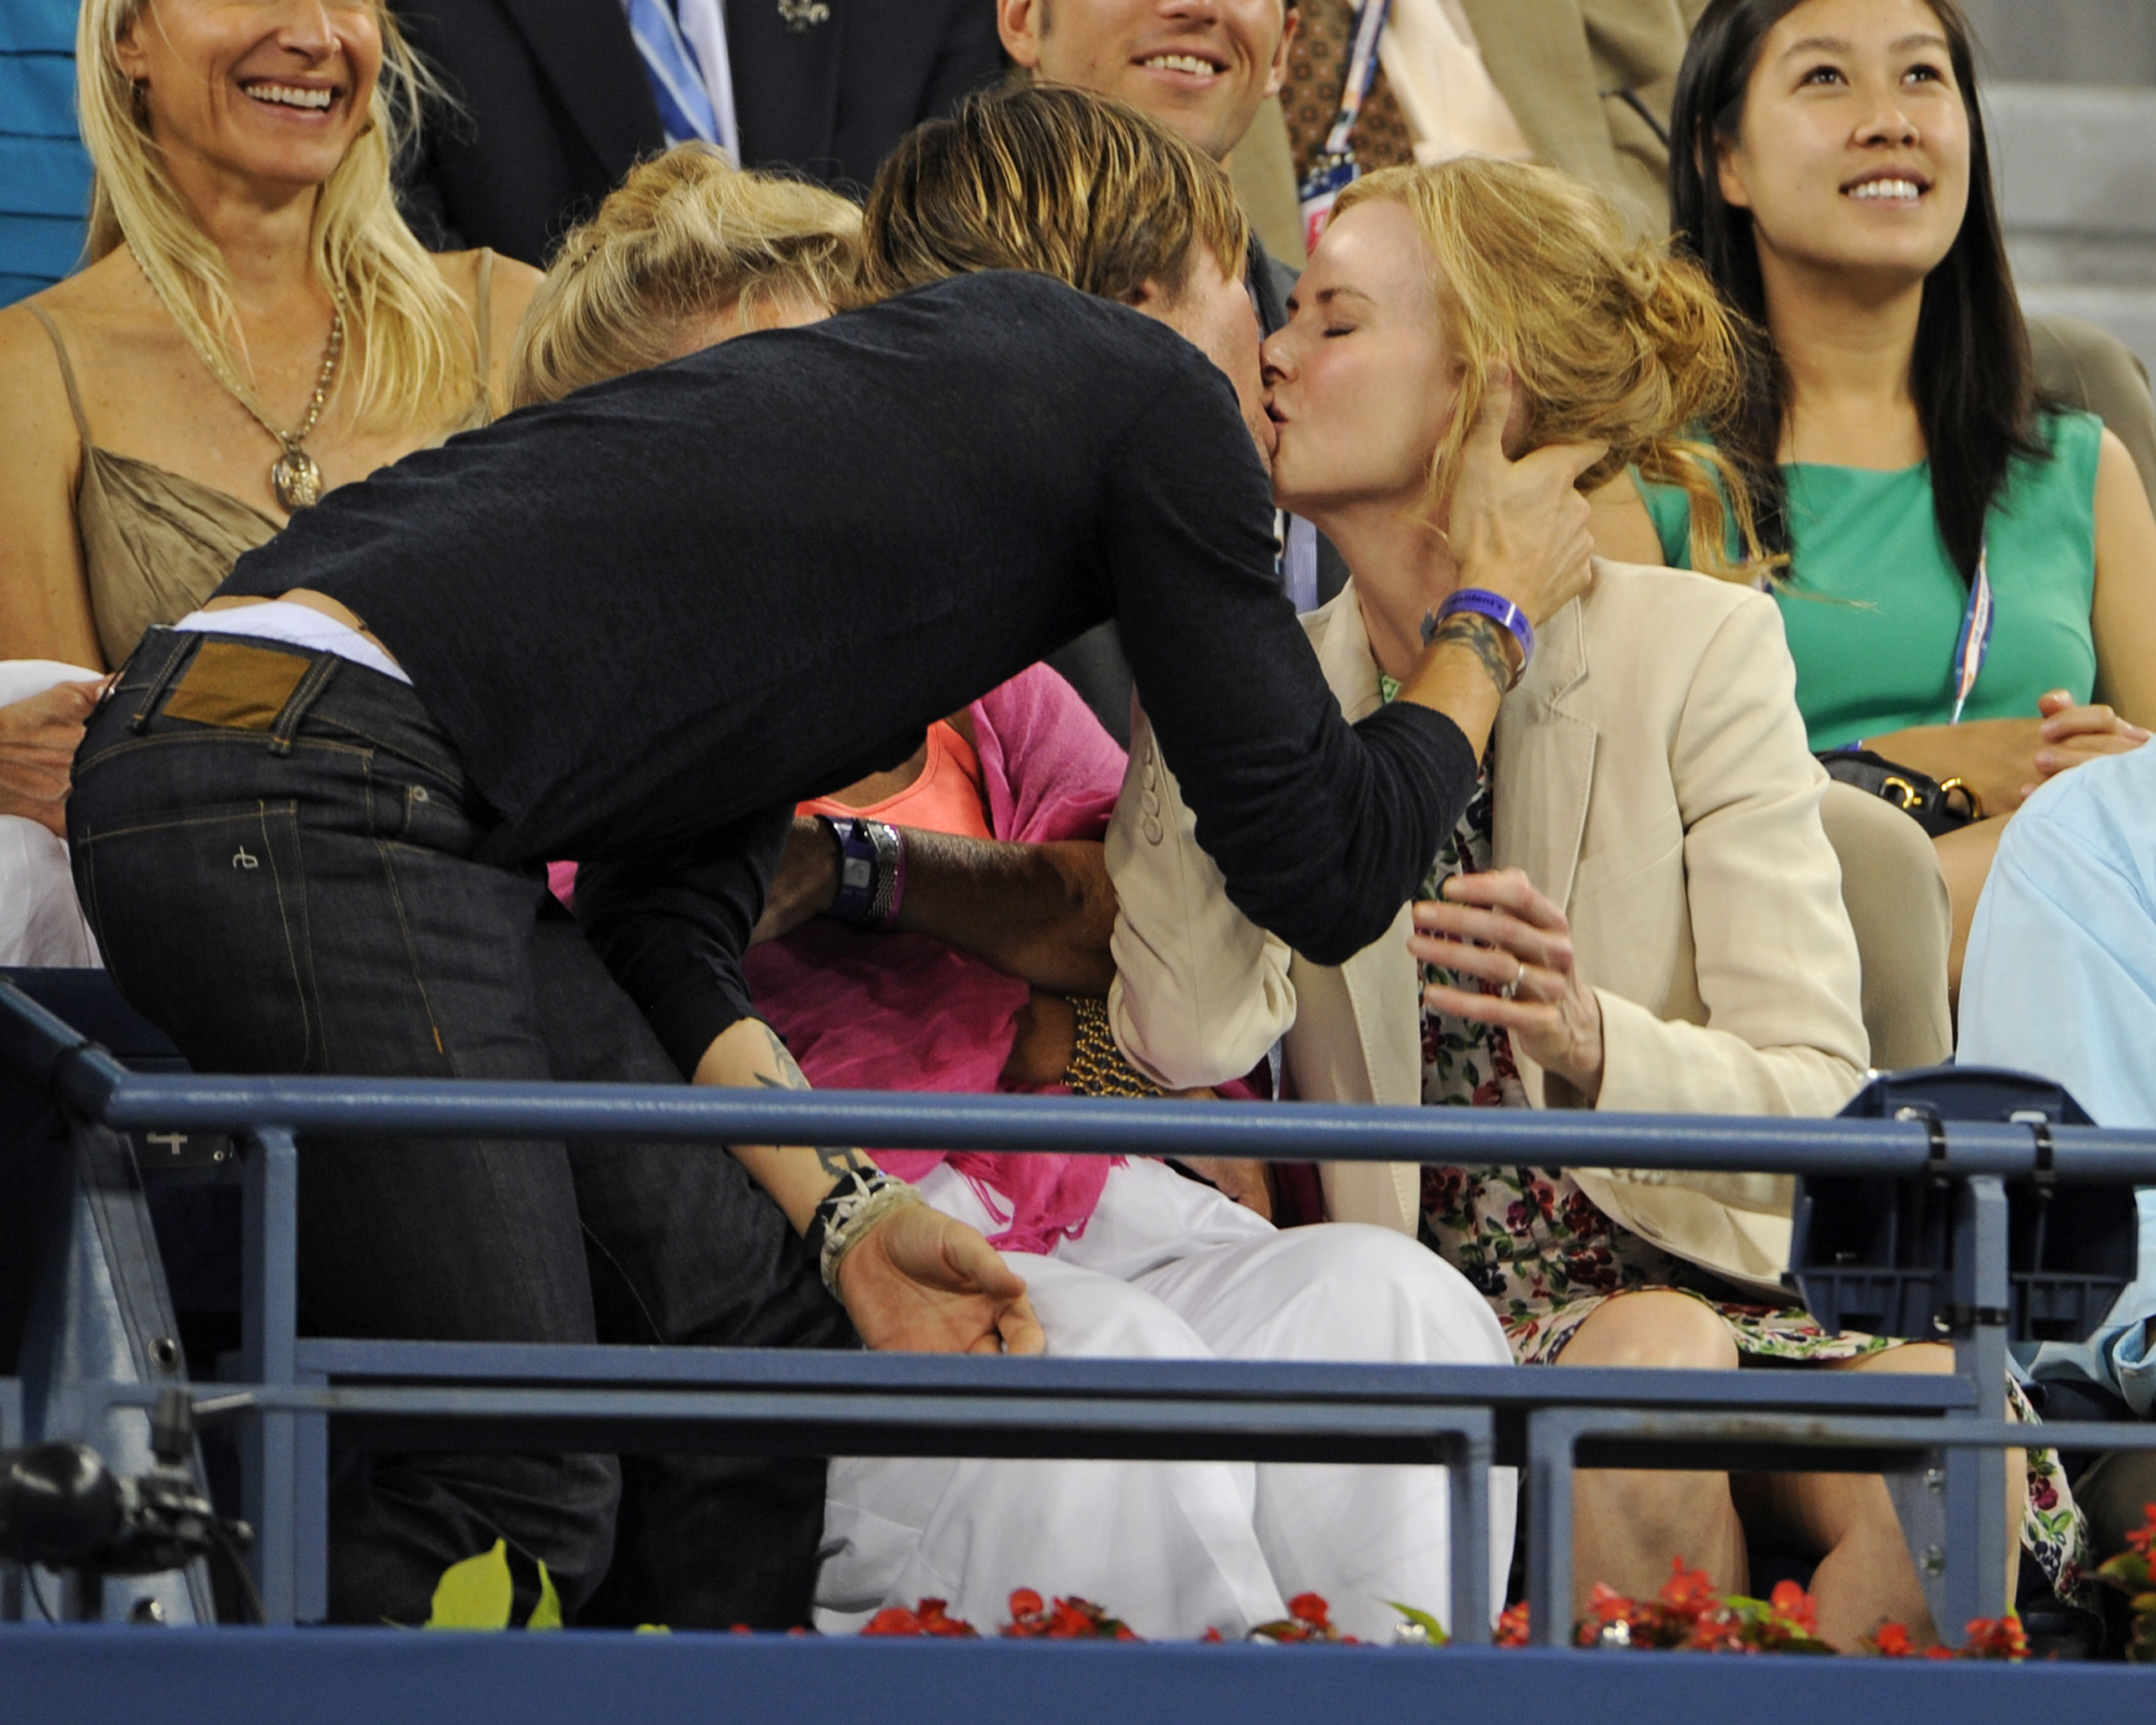 Keith Urban and Nicole Kidman at the US Open on August 31, 2012, in New York City. | Source: Getty Images